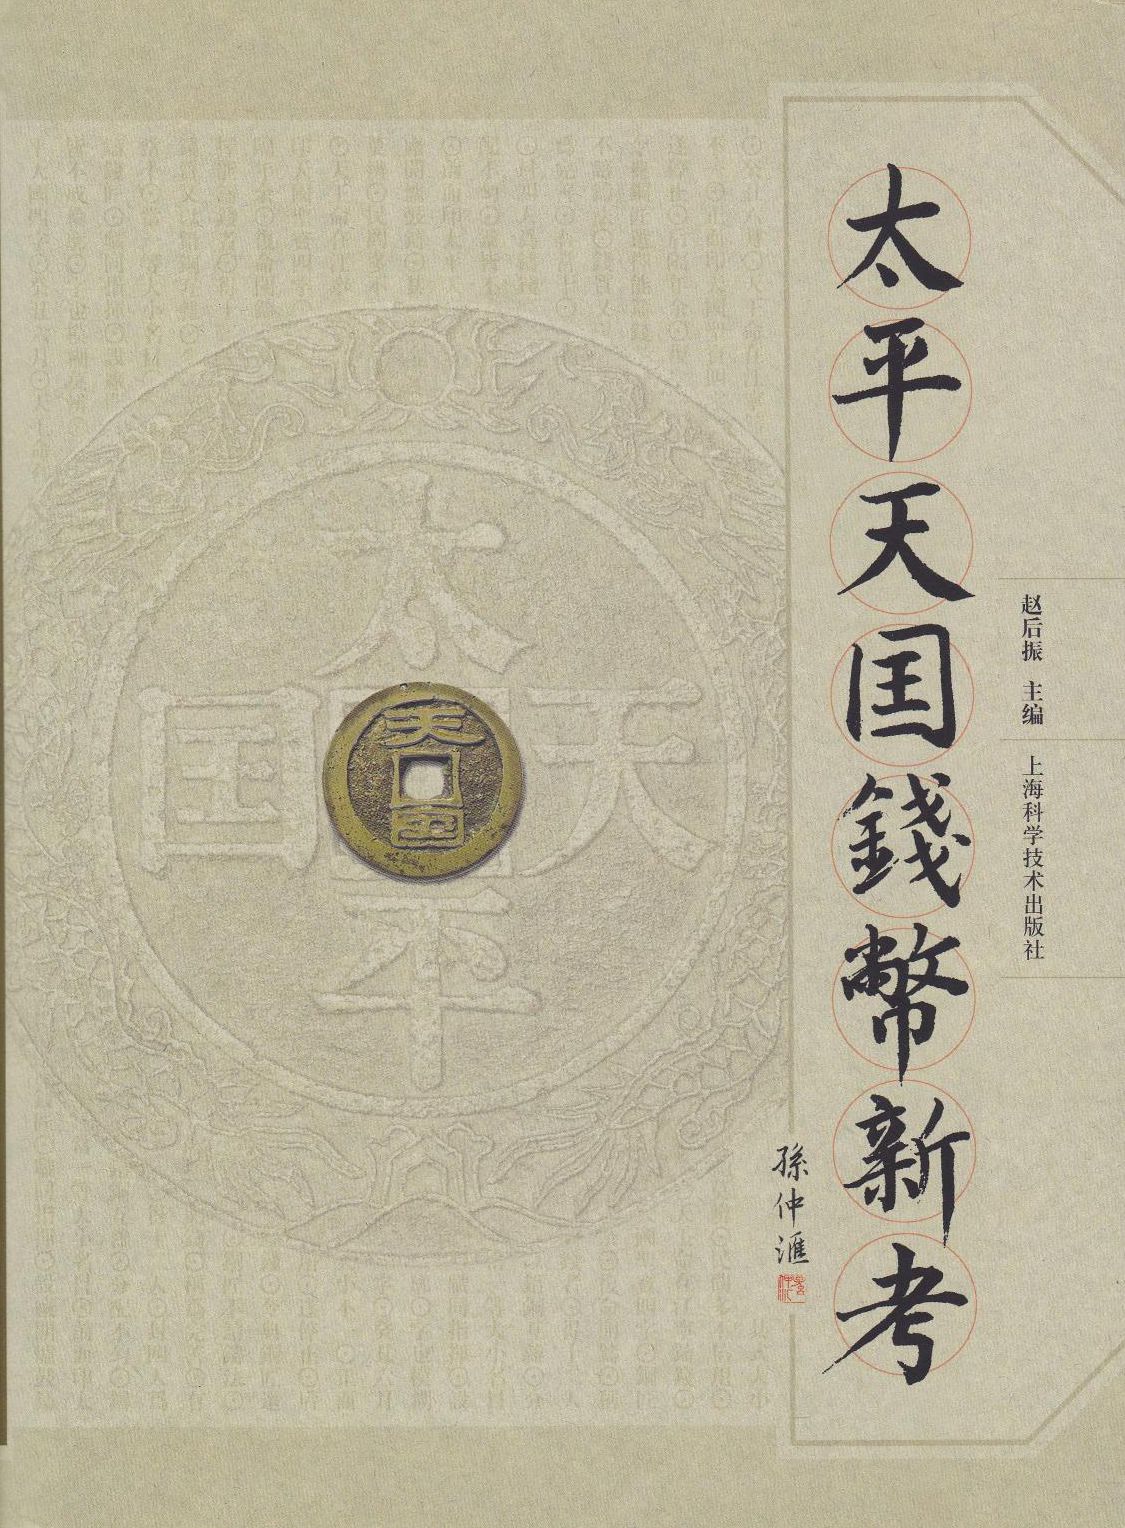 F1070, Study on Tai-Ping Tian-Guo (Kingdom) Coins of China, 1860's